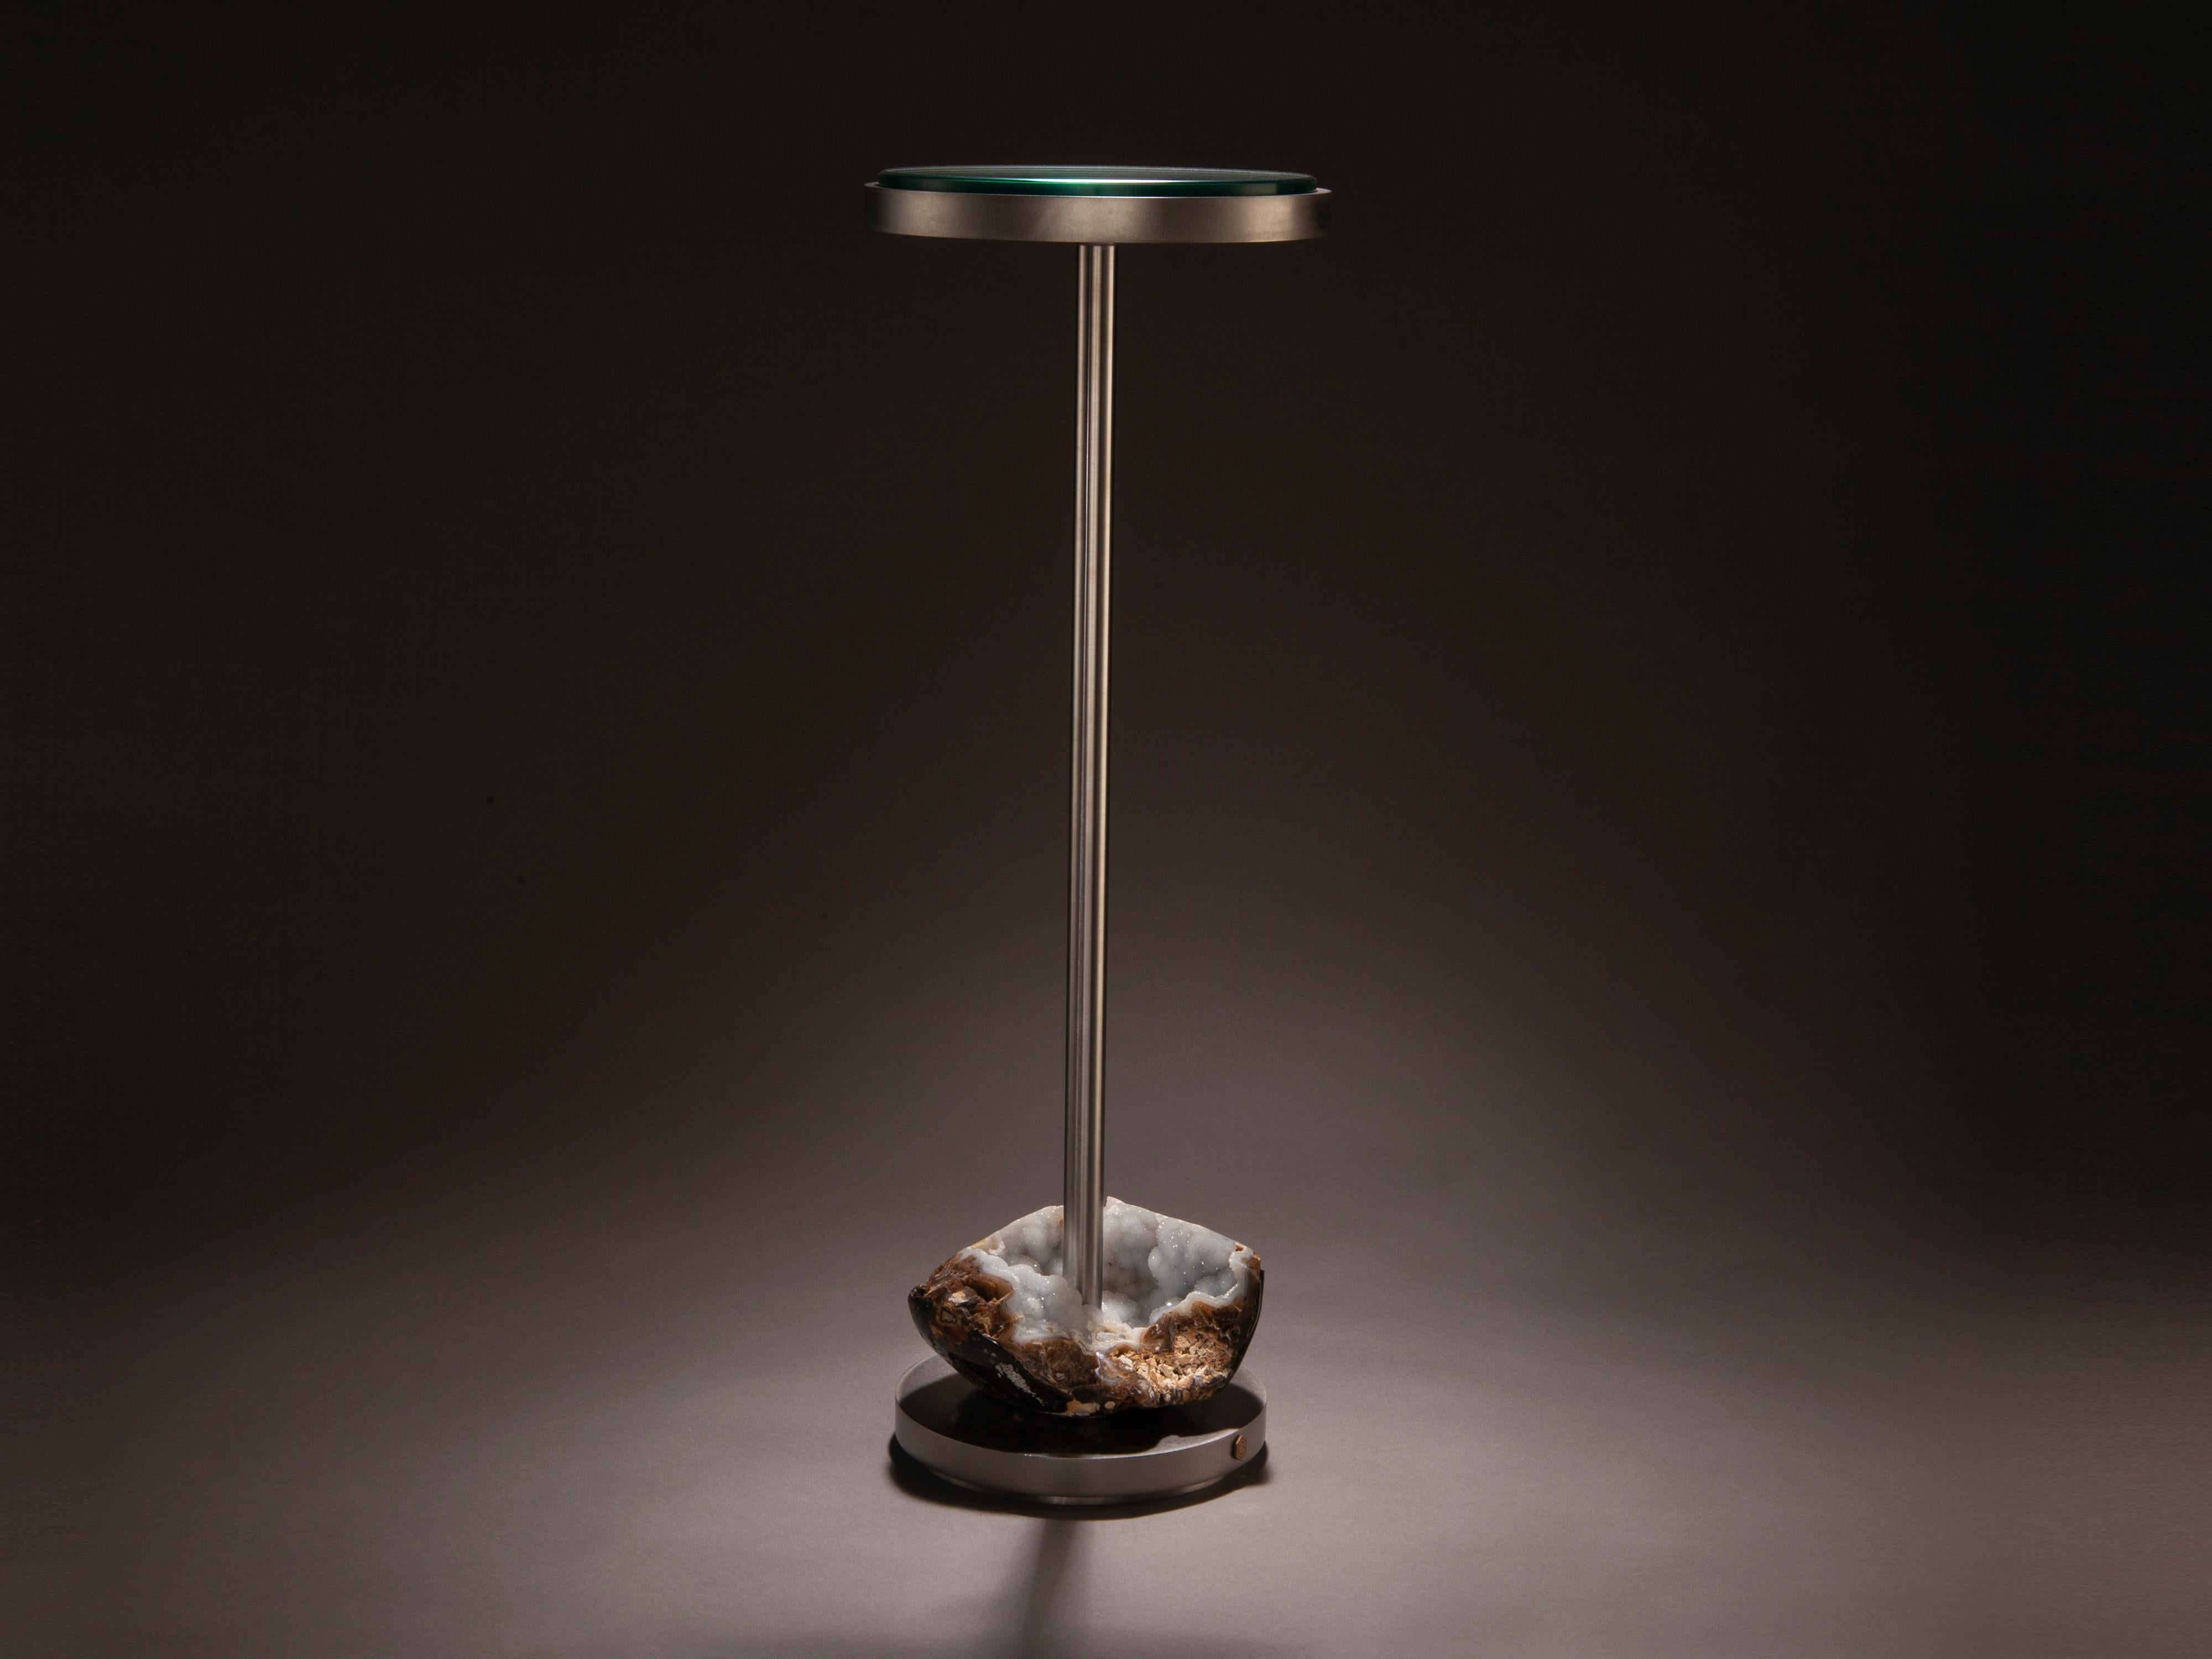 Havana Table 6
Studio Greytak's Havana Table series finds inspiration in the forms of classic smoking table designs from the past. In Havana Table 6 a druzy agate brings delicate glitter and sculptural form to the linearity of the stainless steel.